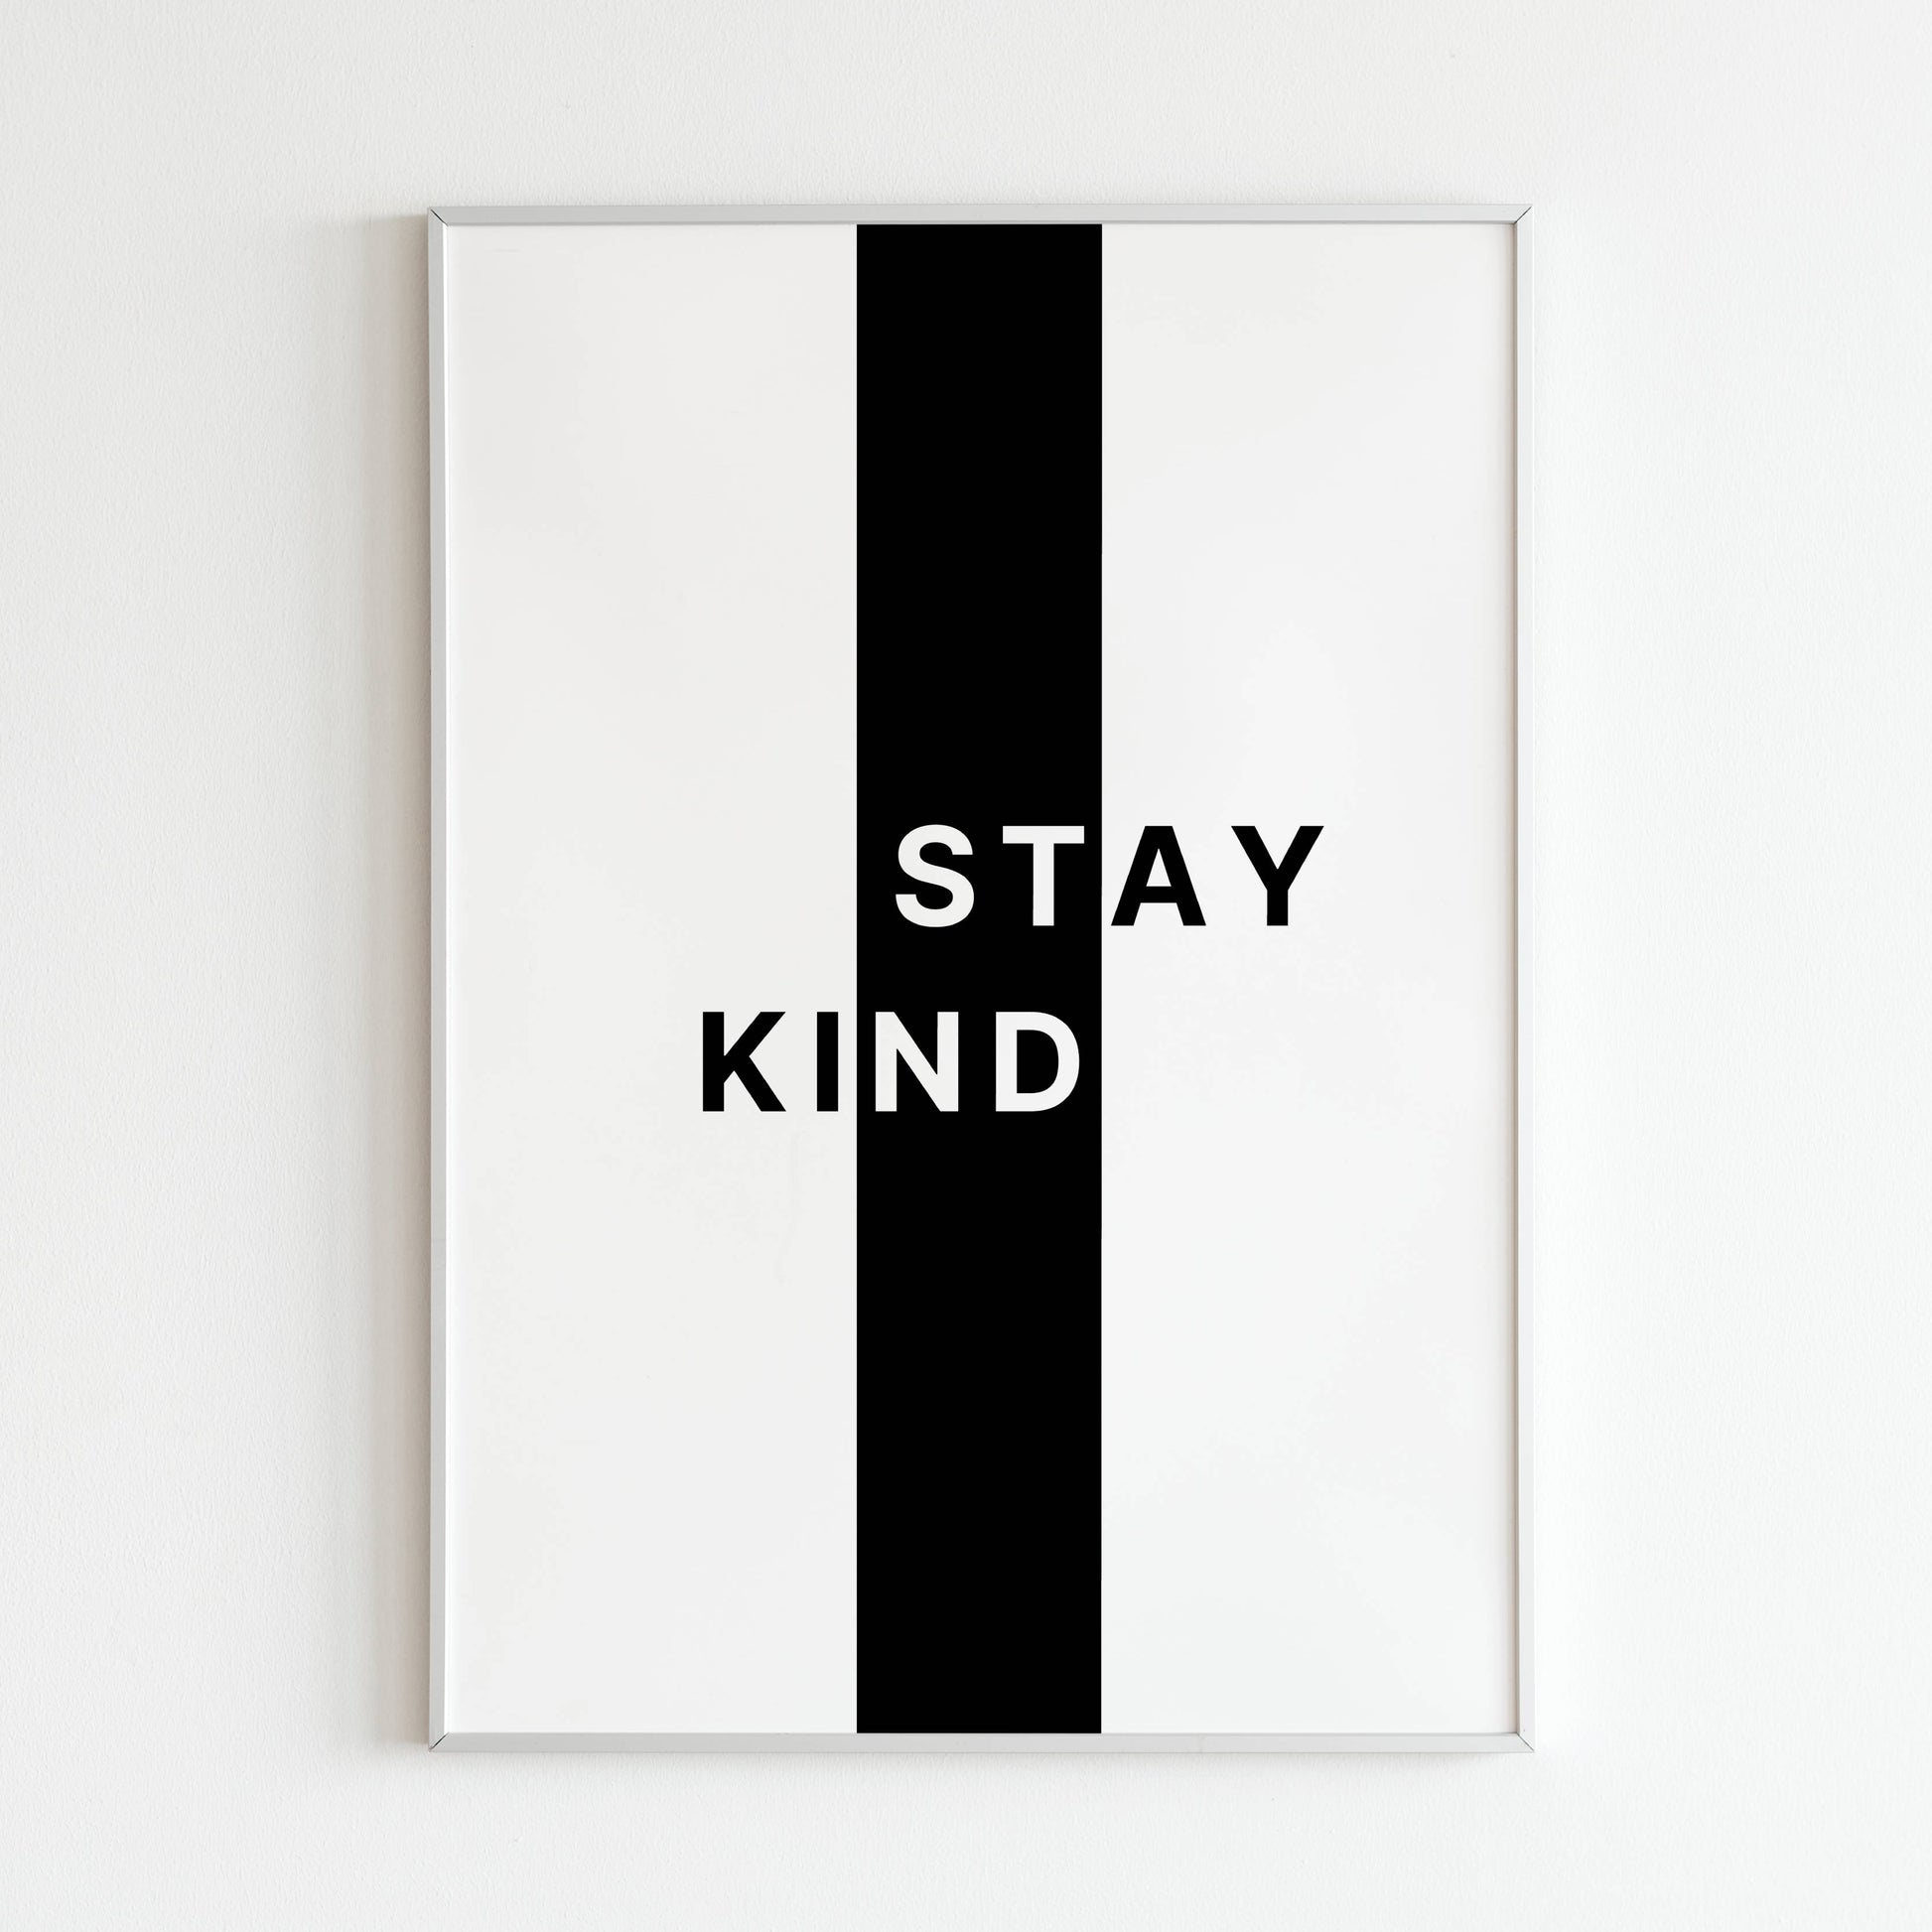 Downloadable "Stay kind" art print, spread positivity and encourage kindness in yourself and others.